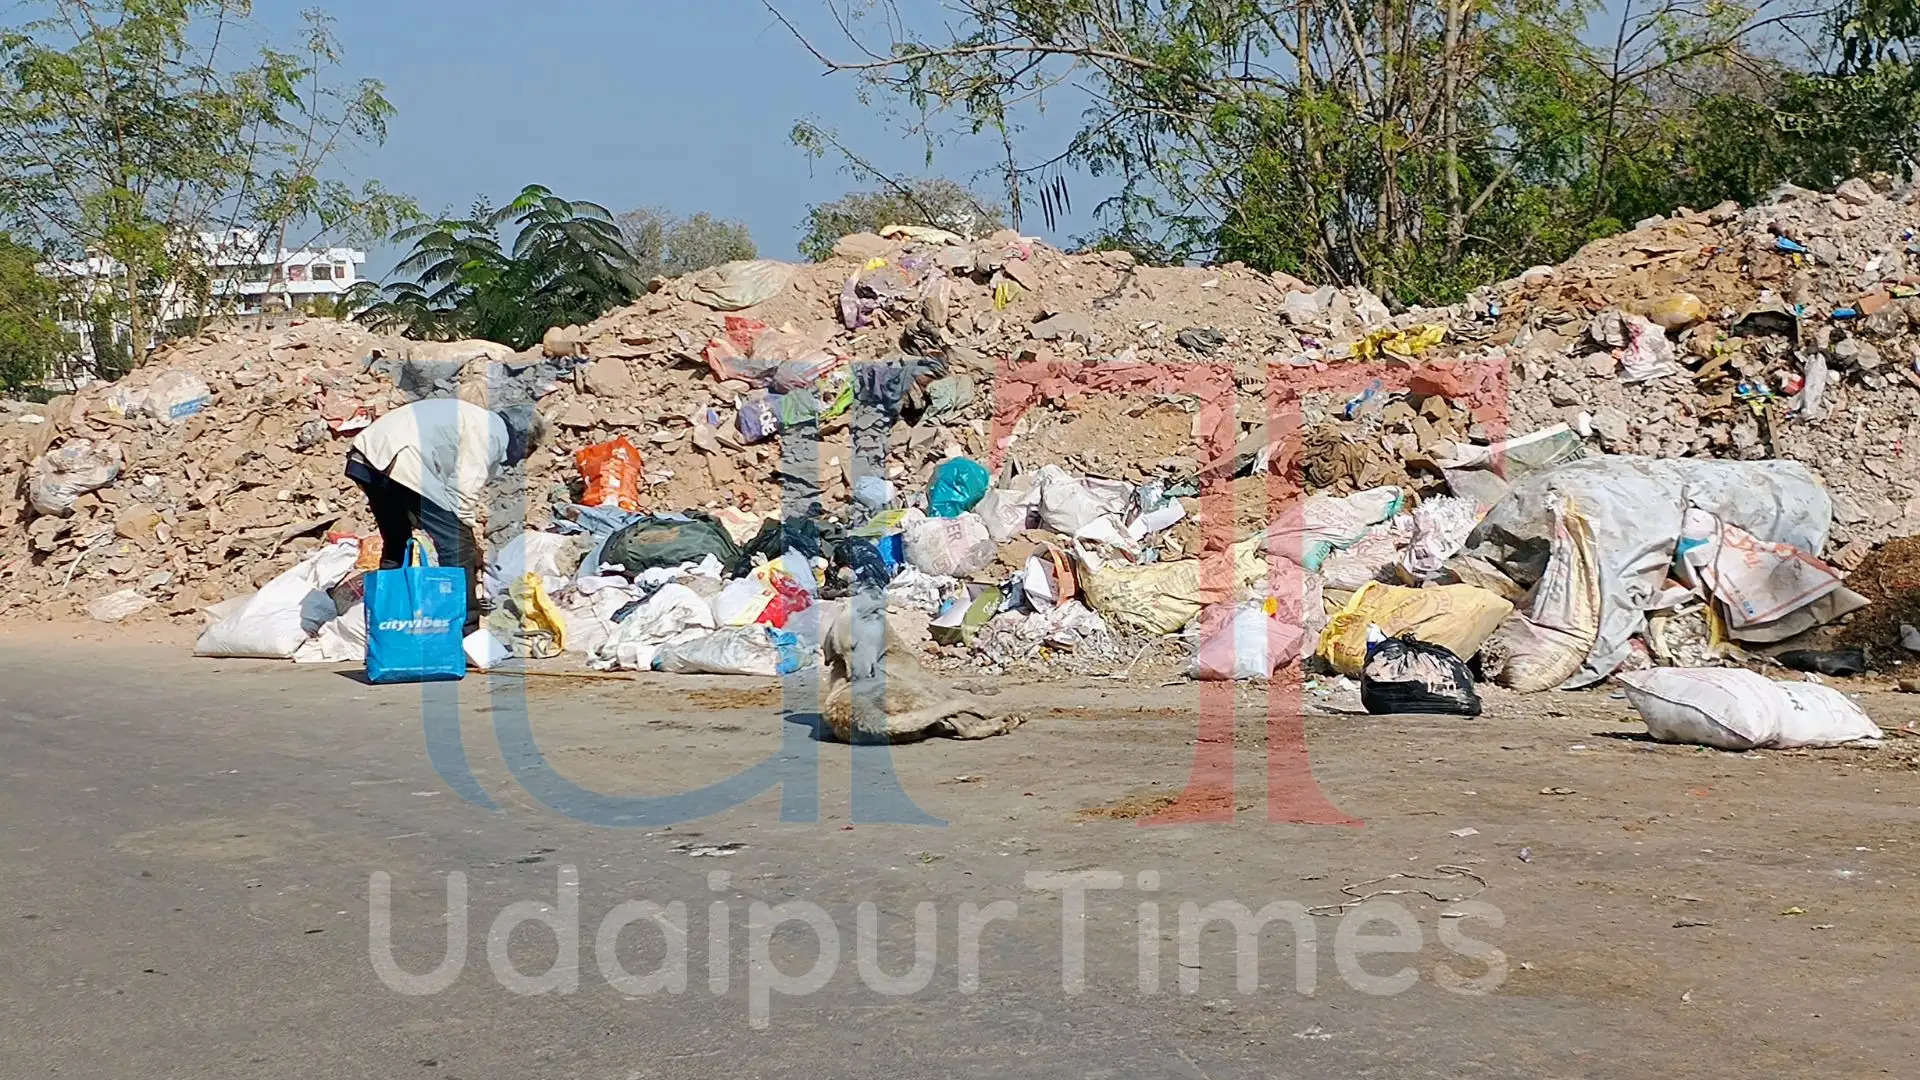 Udaipur Rank Decline in Cleanliness